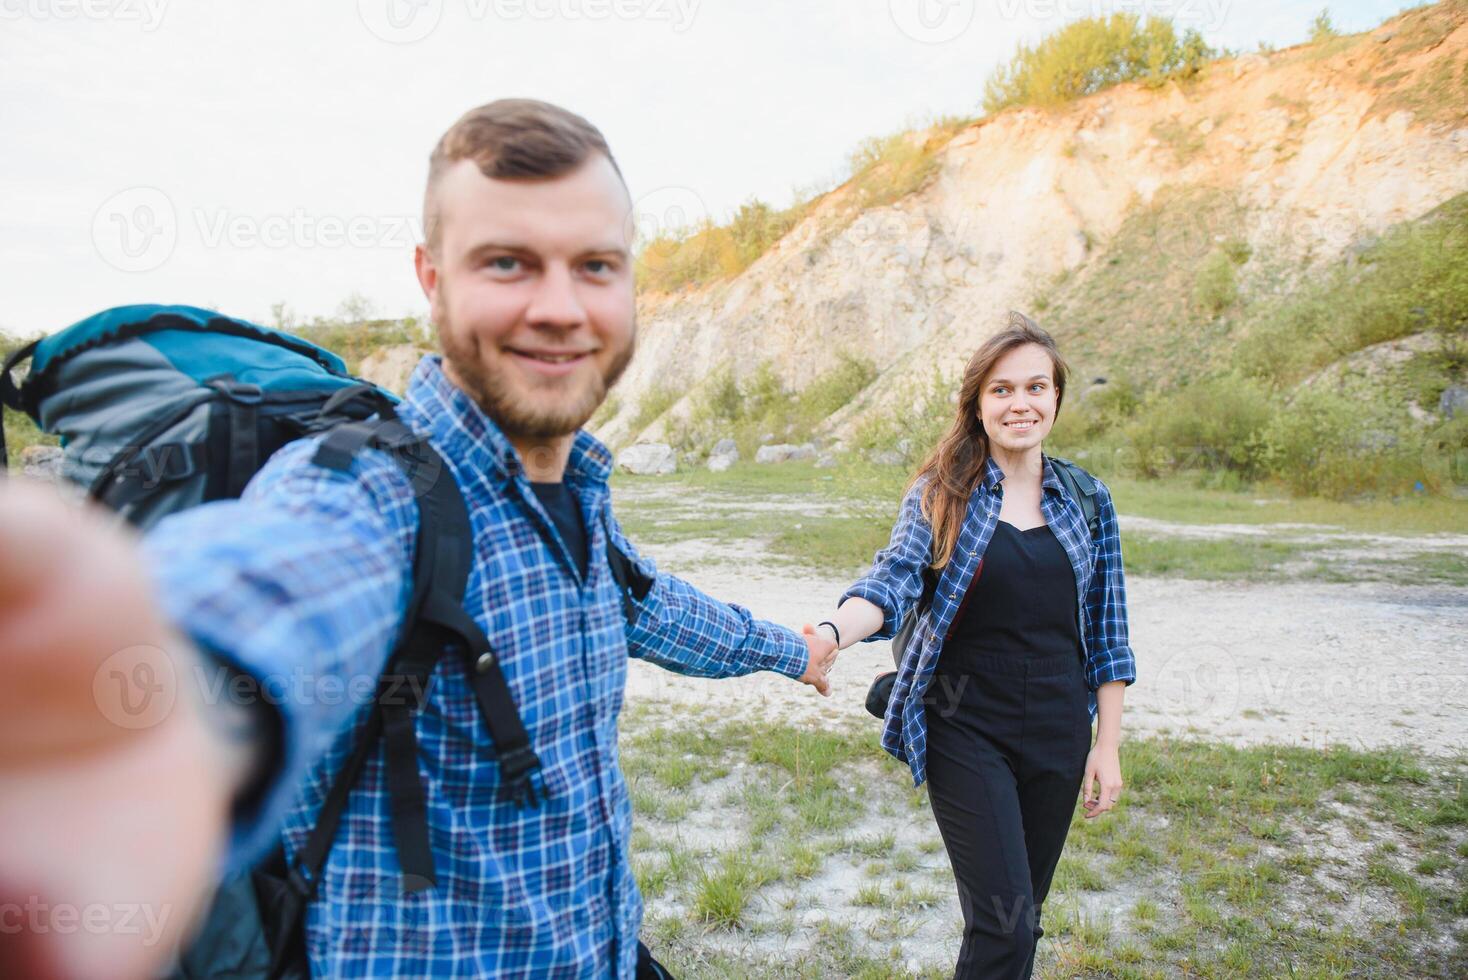 Couple With Backpacks Take Selfie Photo Over Mountain Landscape Trekking, Young Man And Woman On Hike Tourists Adventure Activity